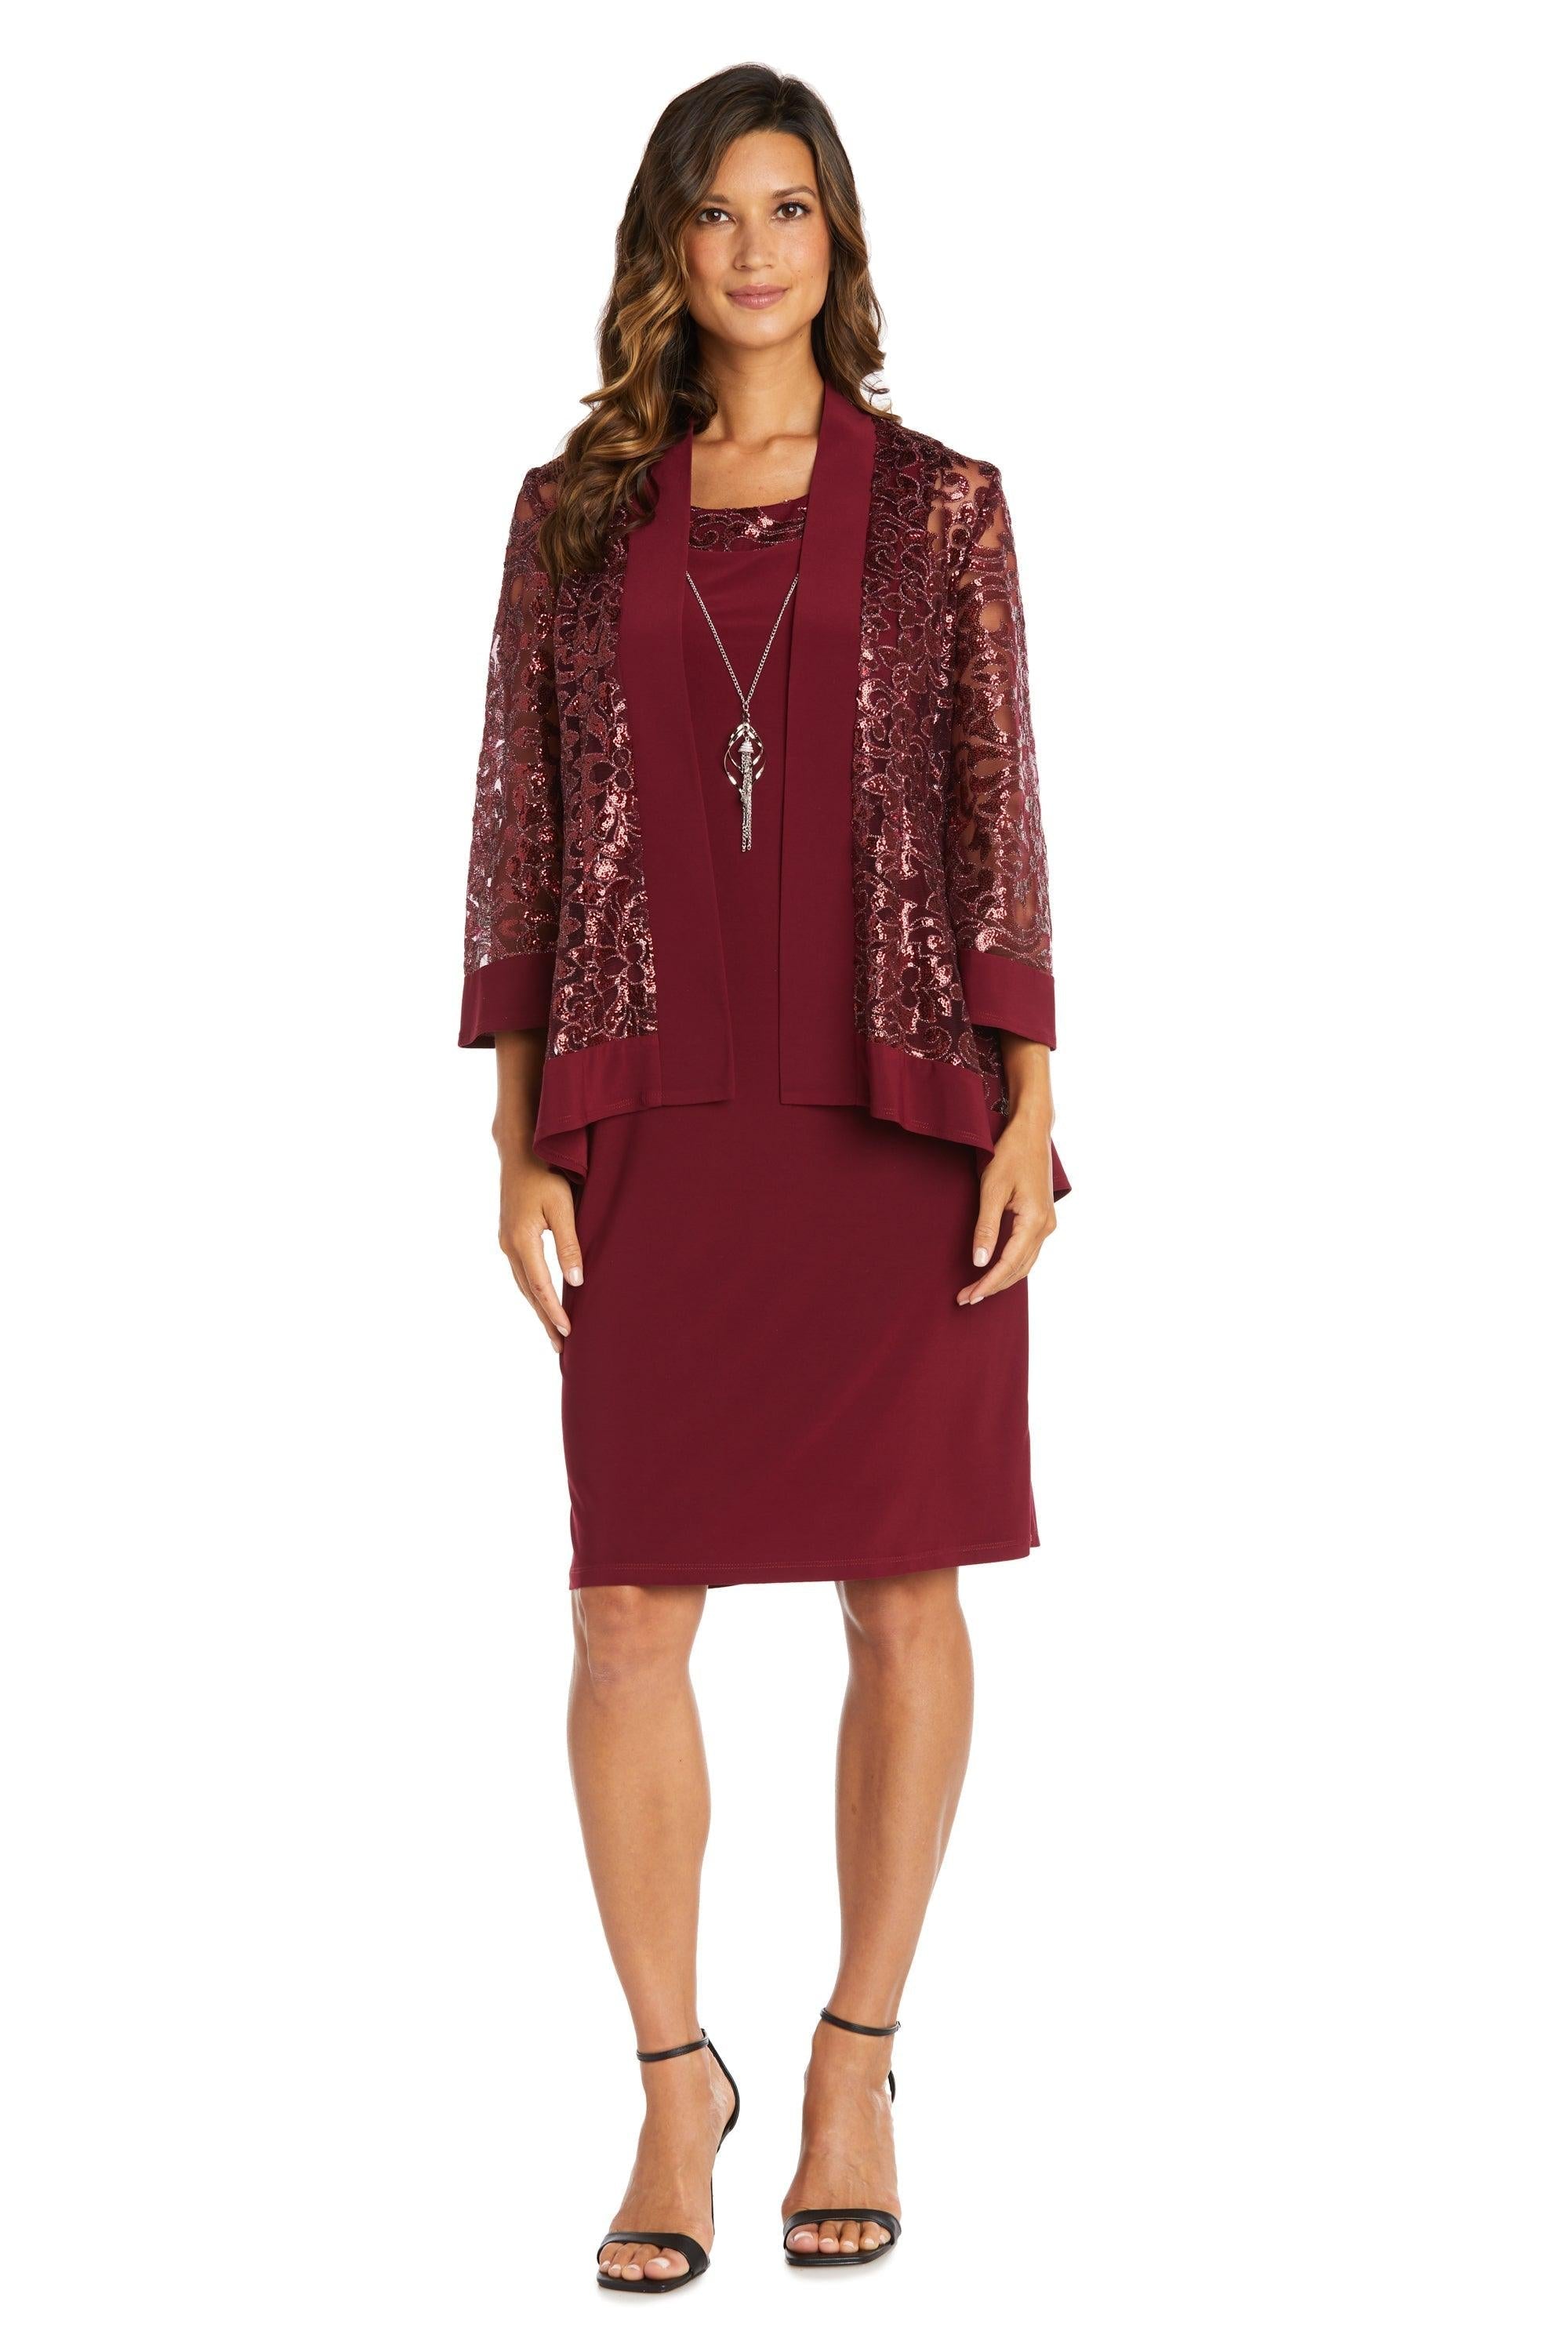 Lace Jacket Dress with Pearl Neck Trim – R&M Richards